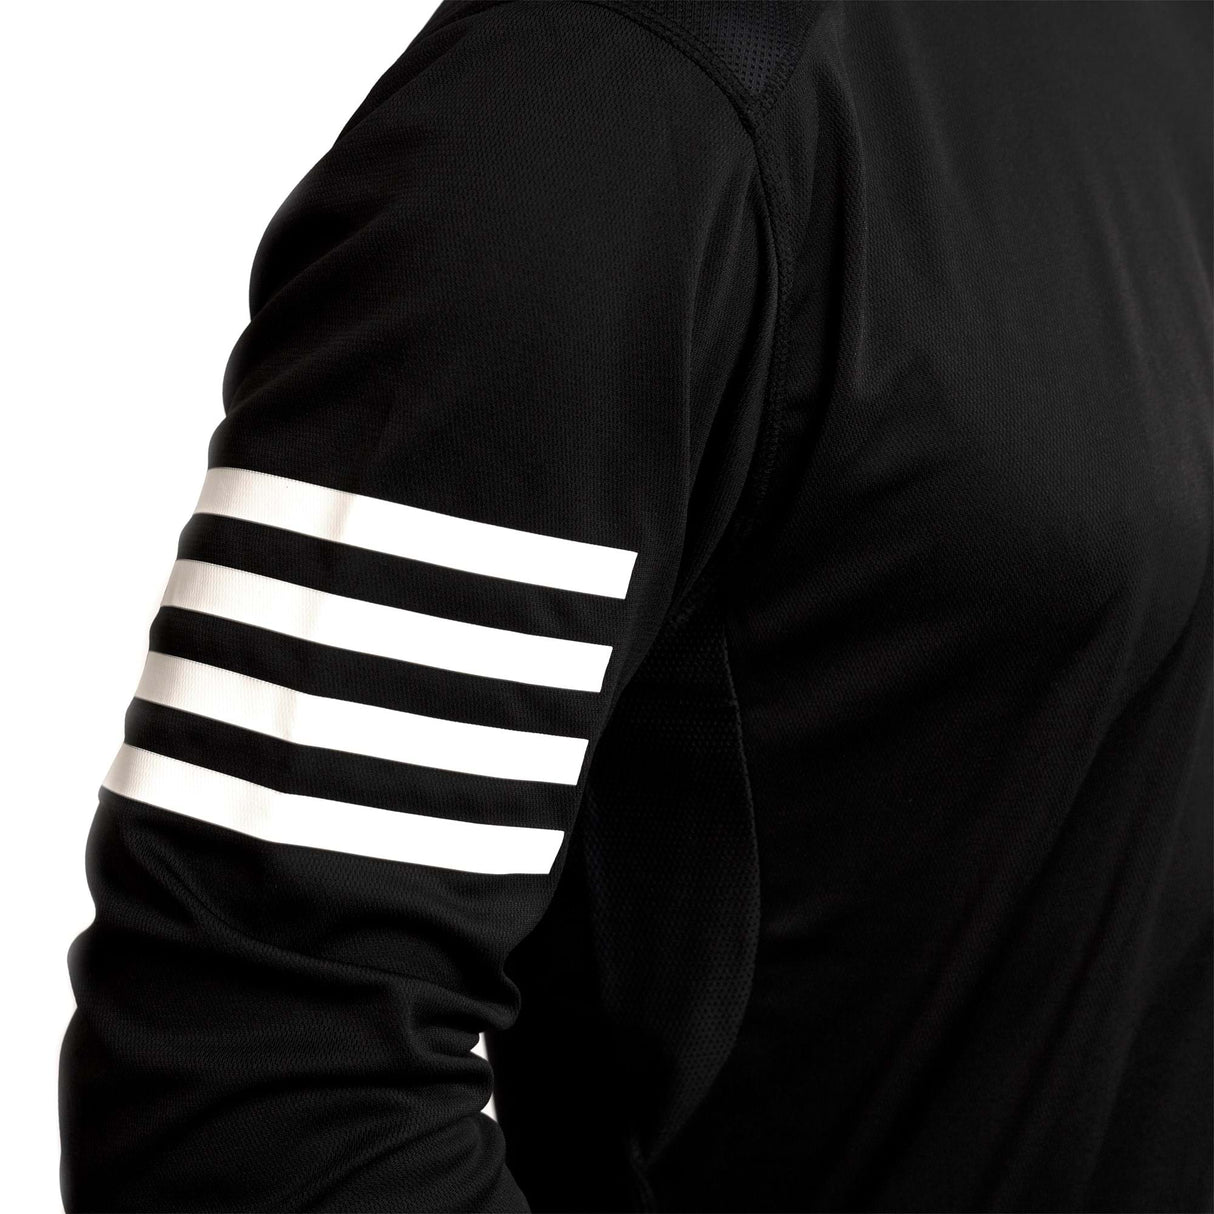 Fasthouse Alloy Rally Long Sleeve Jersey